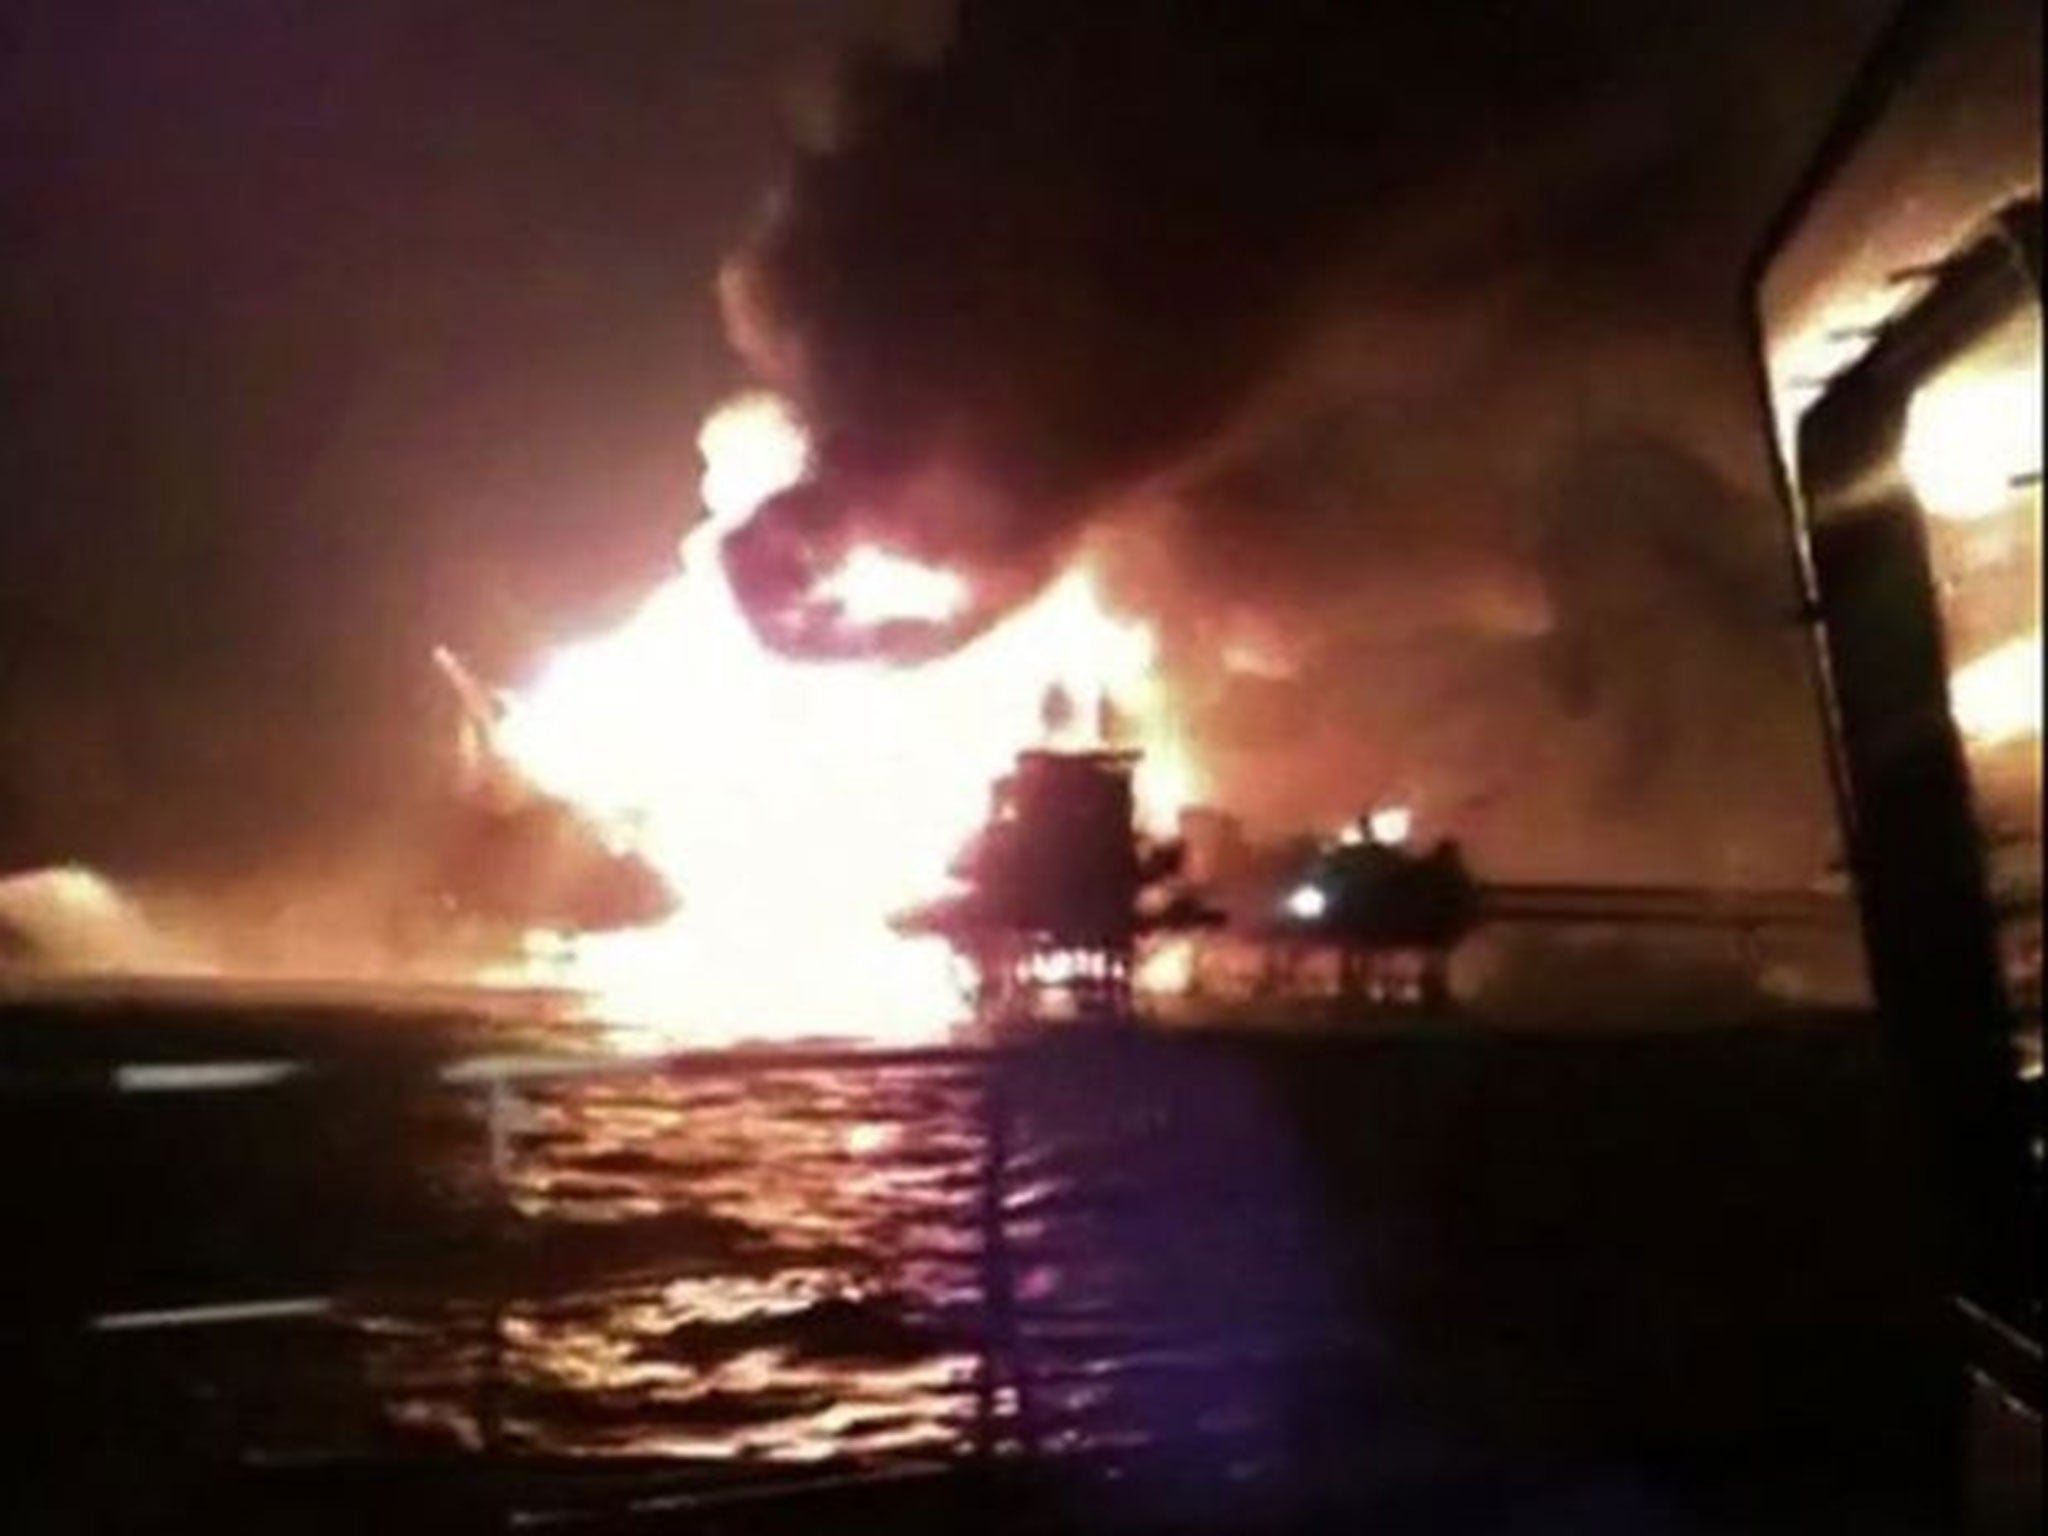 The Abkatun A-Permanente platform on the Gulf of Mexico's Campeche Sound as it burns